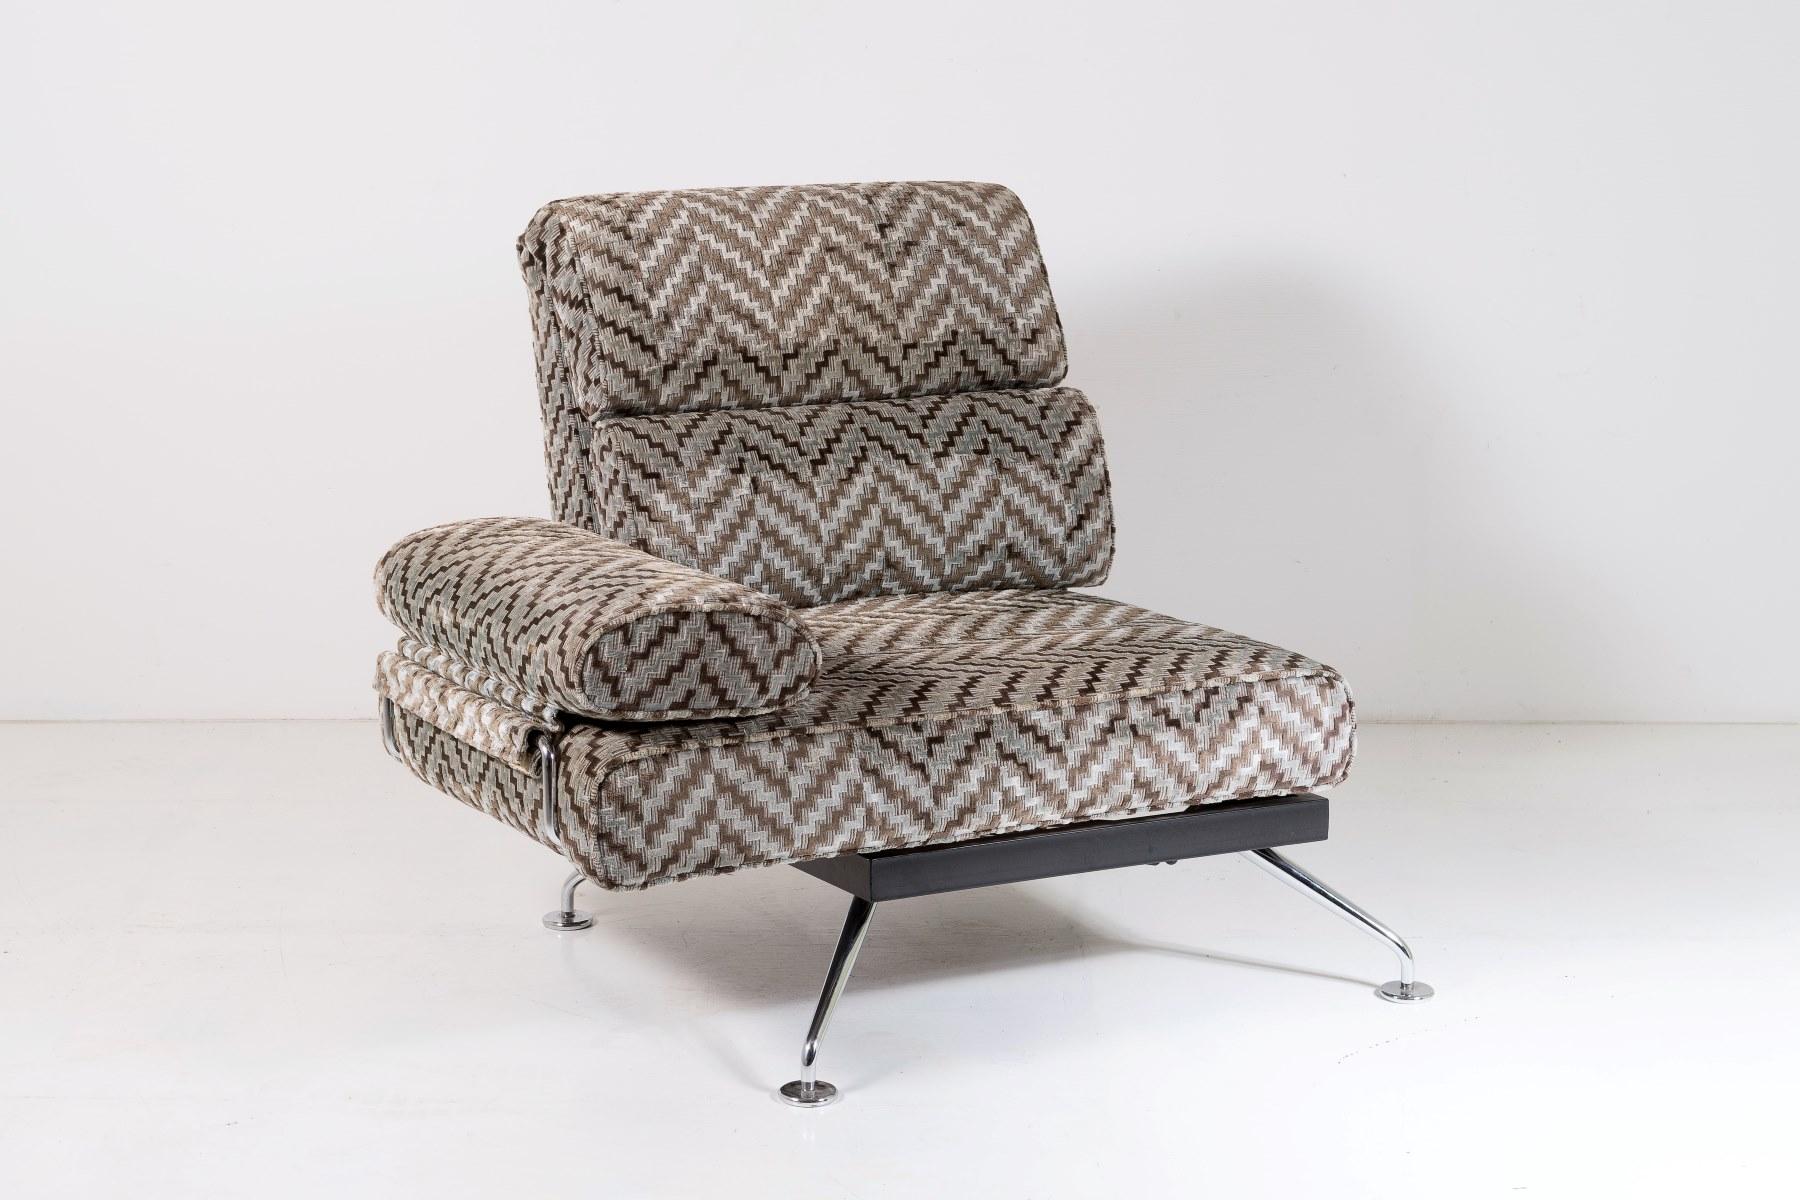 British 80s Modern Chaise Longue Day Bed Recliner Chair in Original Stone Chevron Fabric